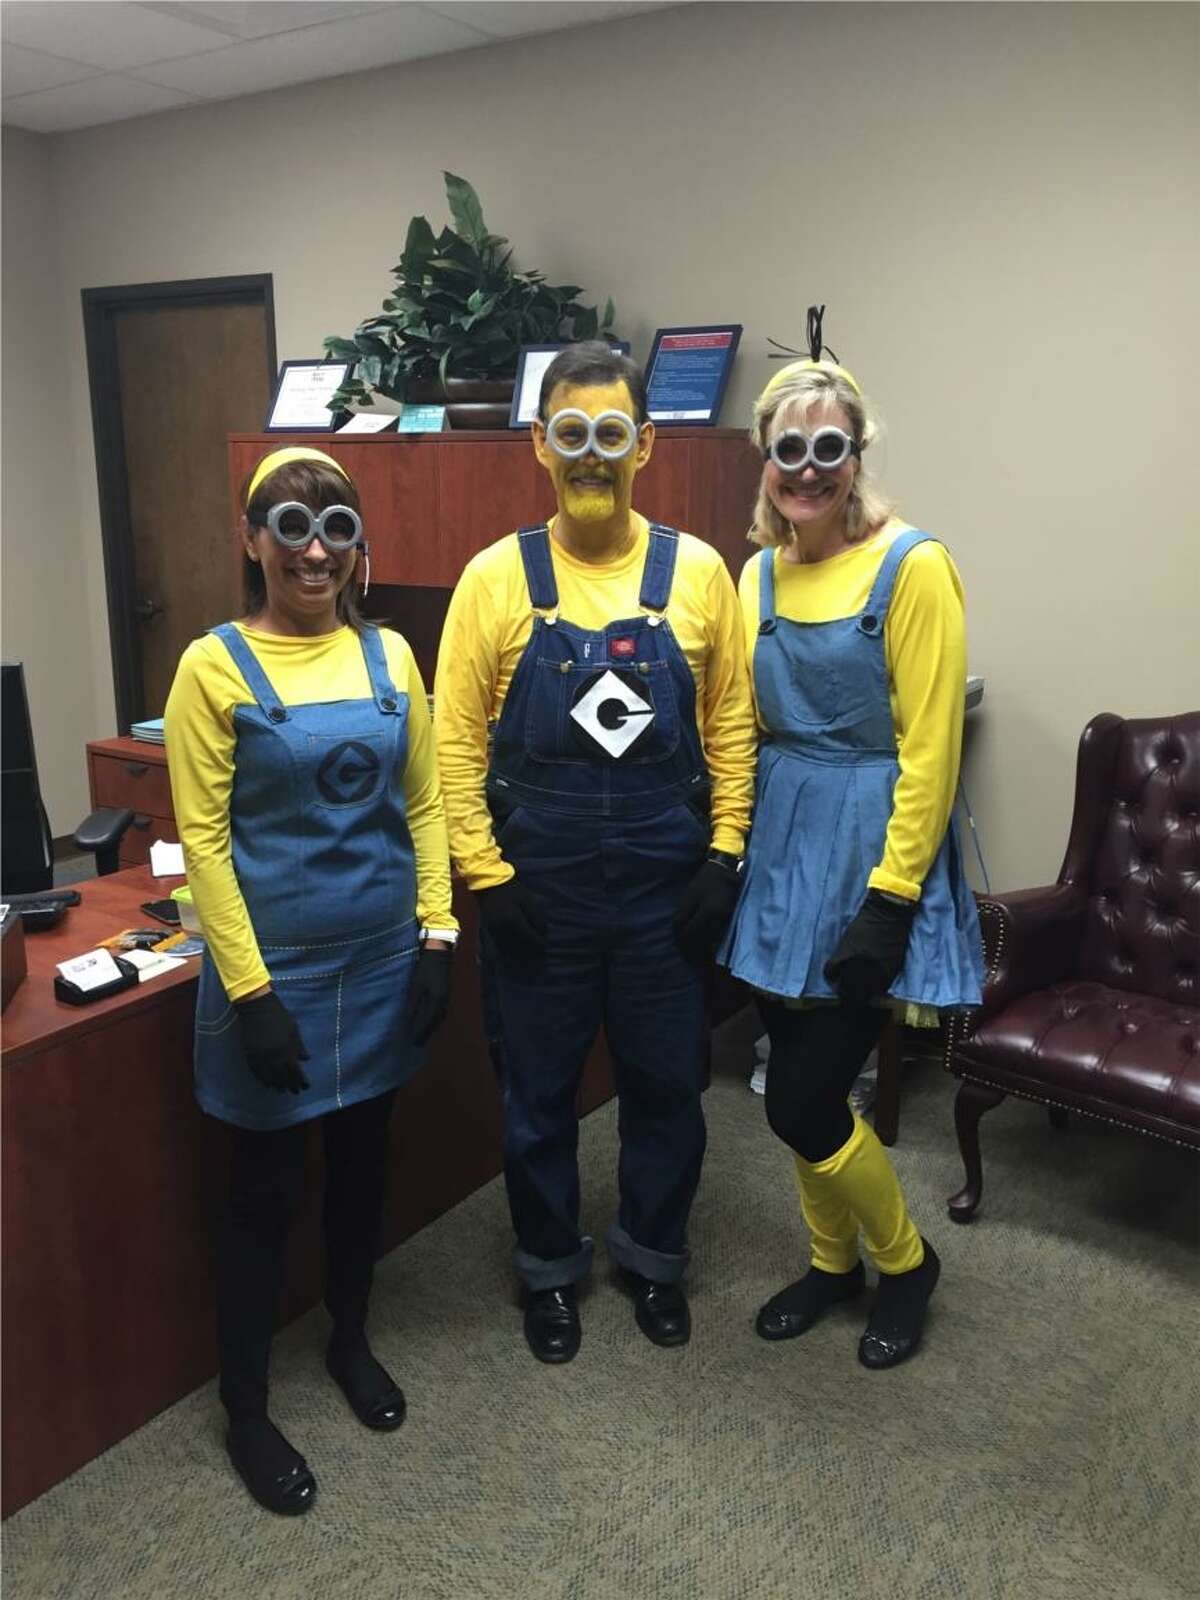 HealthTexas Medical Group employees enjoy a Halloween celebration. “I believe that this company has my best interests at heart,” one employee says. “Lastly, we are always having fun.”